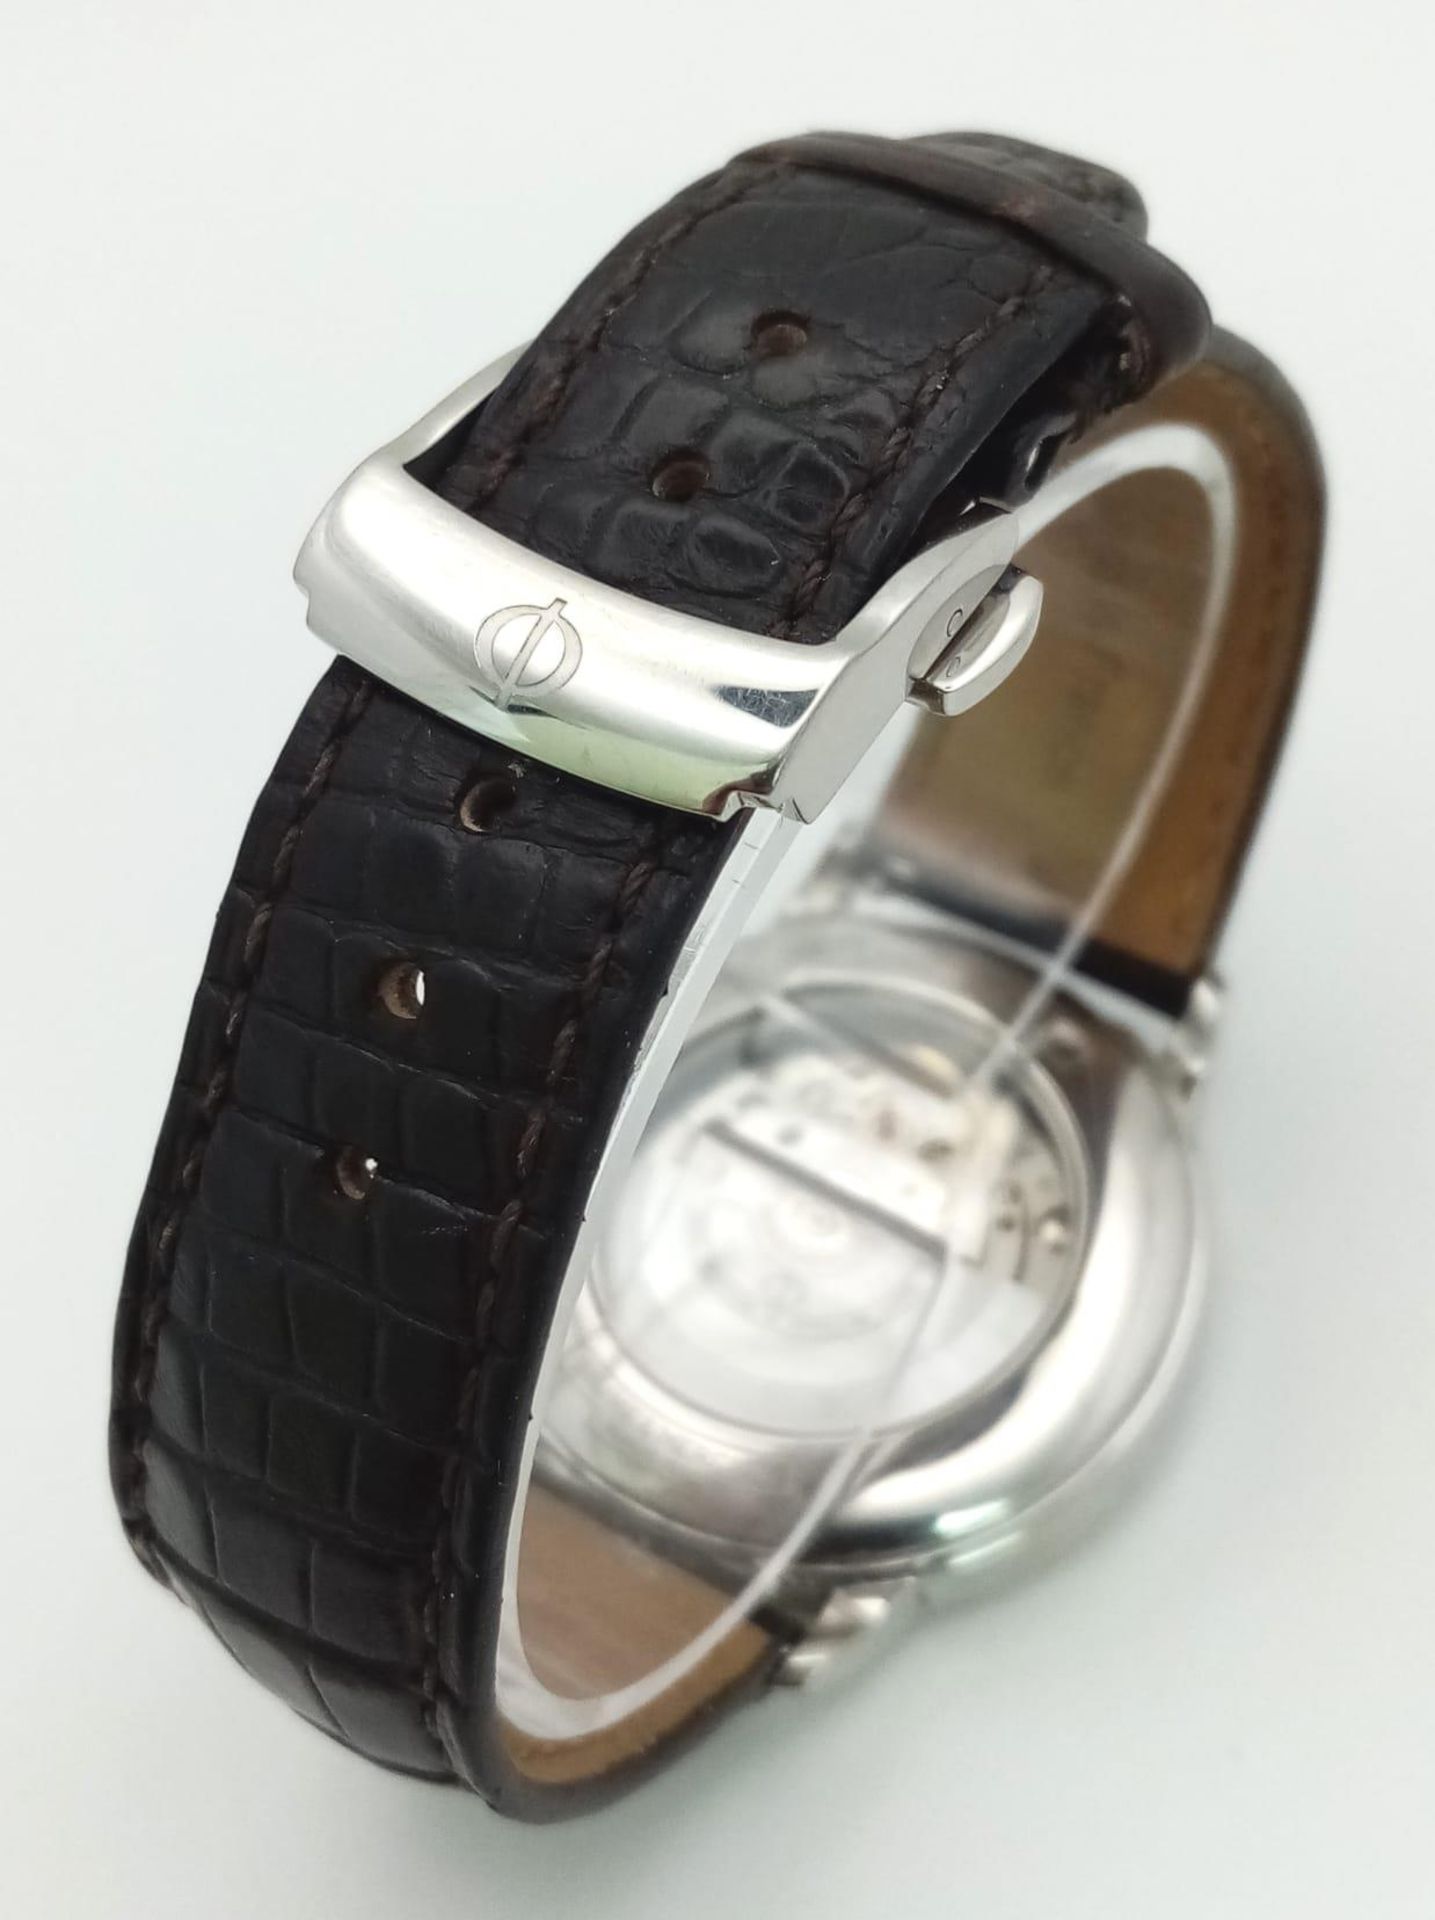 A Baume and Mercier Automatic Gents Watch. Original leather strap. Stainless steel case with - Image 6 of 8